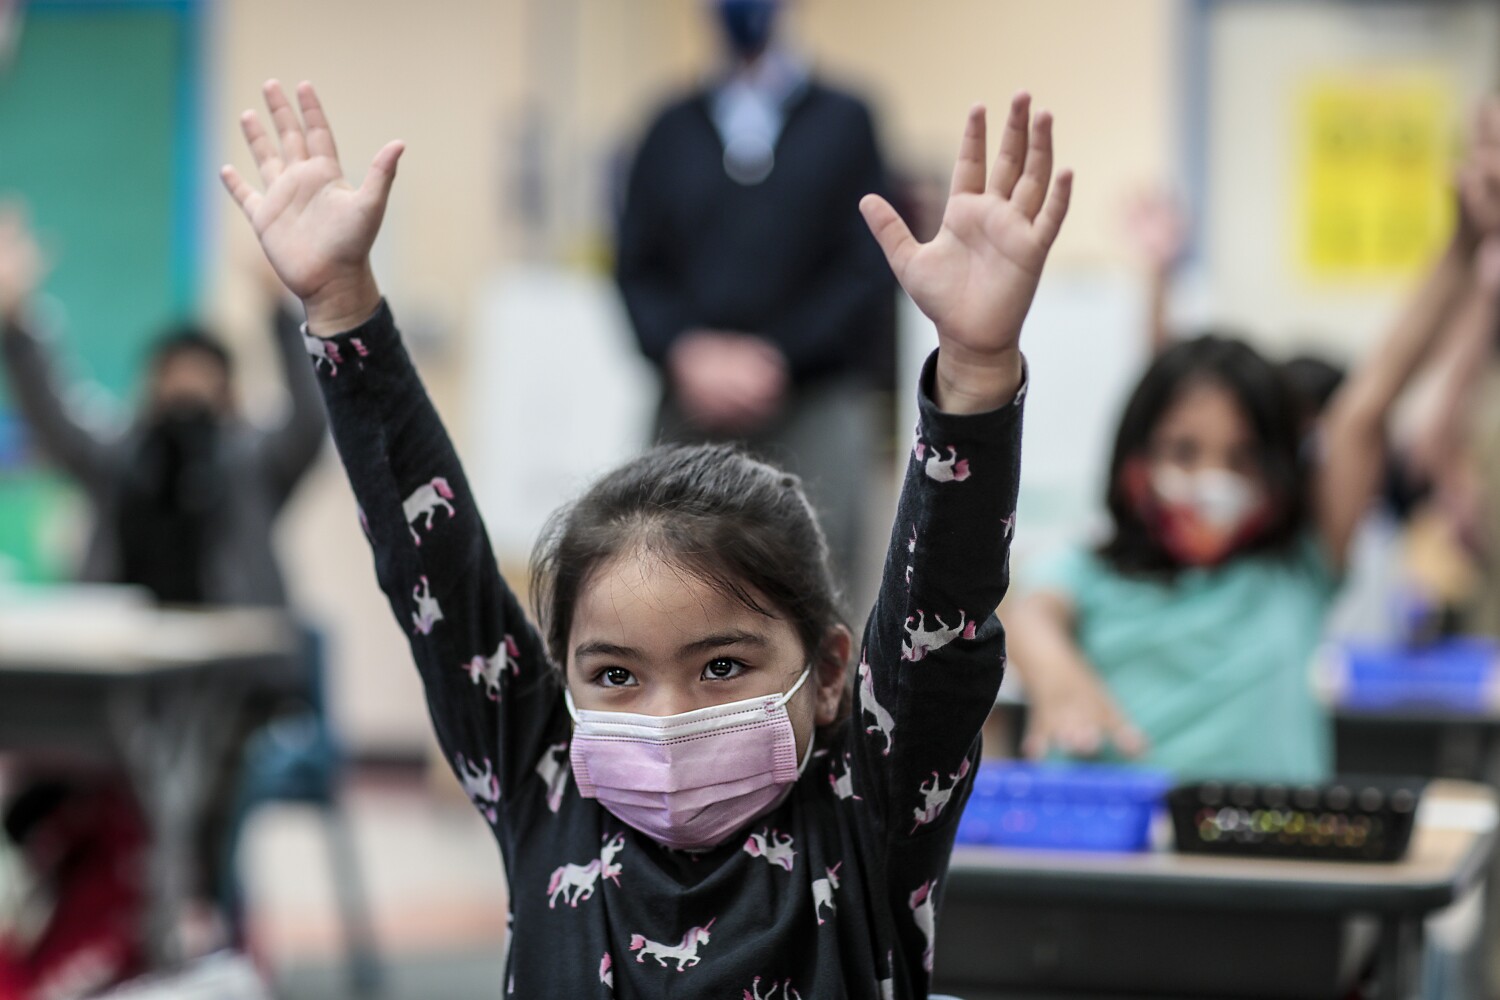 California to require masks at school, a cautious decision that treats all students the same